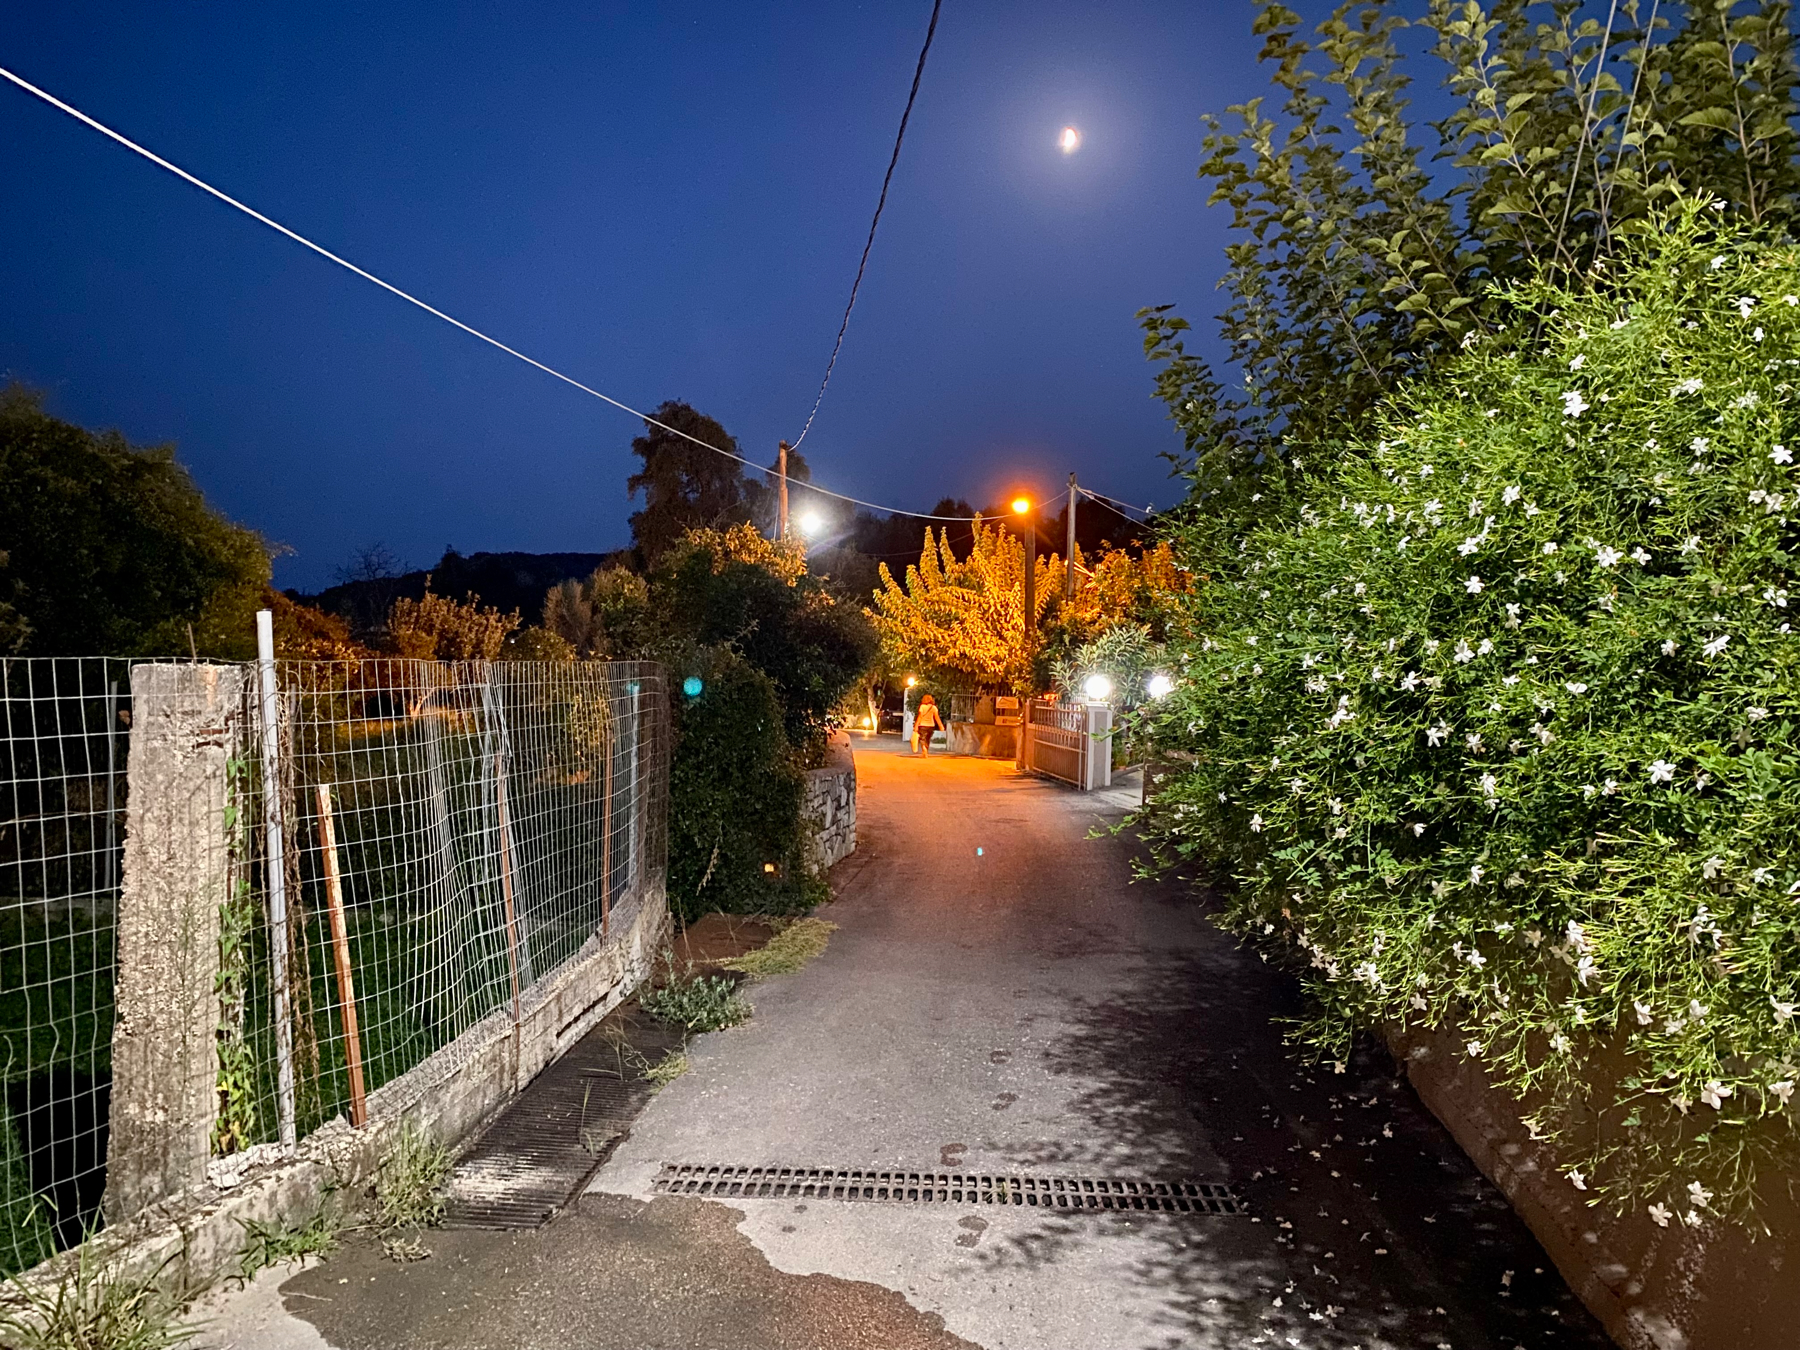 Narrow road bordered on the left by a wire fence and the right by a flowering hedge. Taken just after dusk so there is illumination from street lights and the moon is visible in a dark sky. Gateway, stone wall and woman walking with shopping bag in the distance